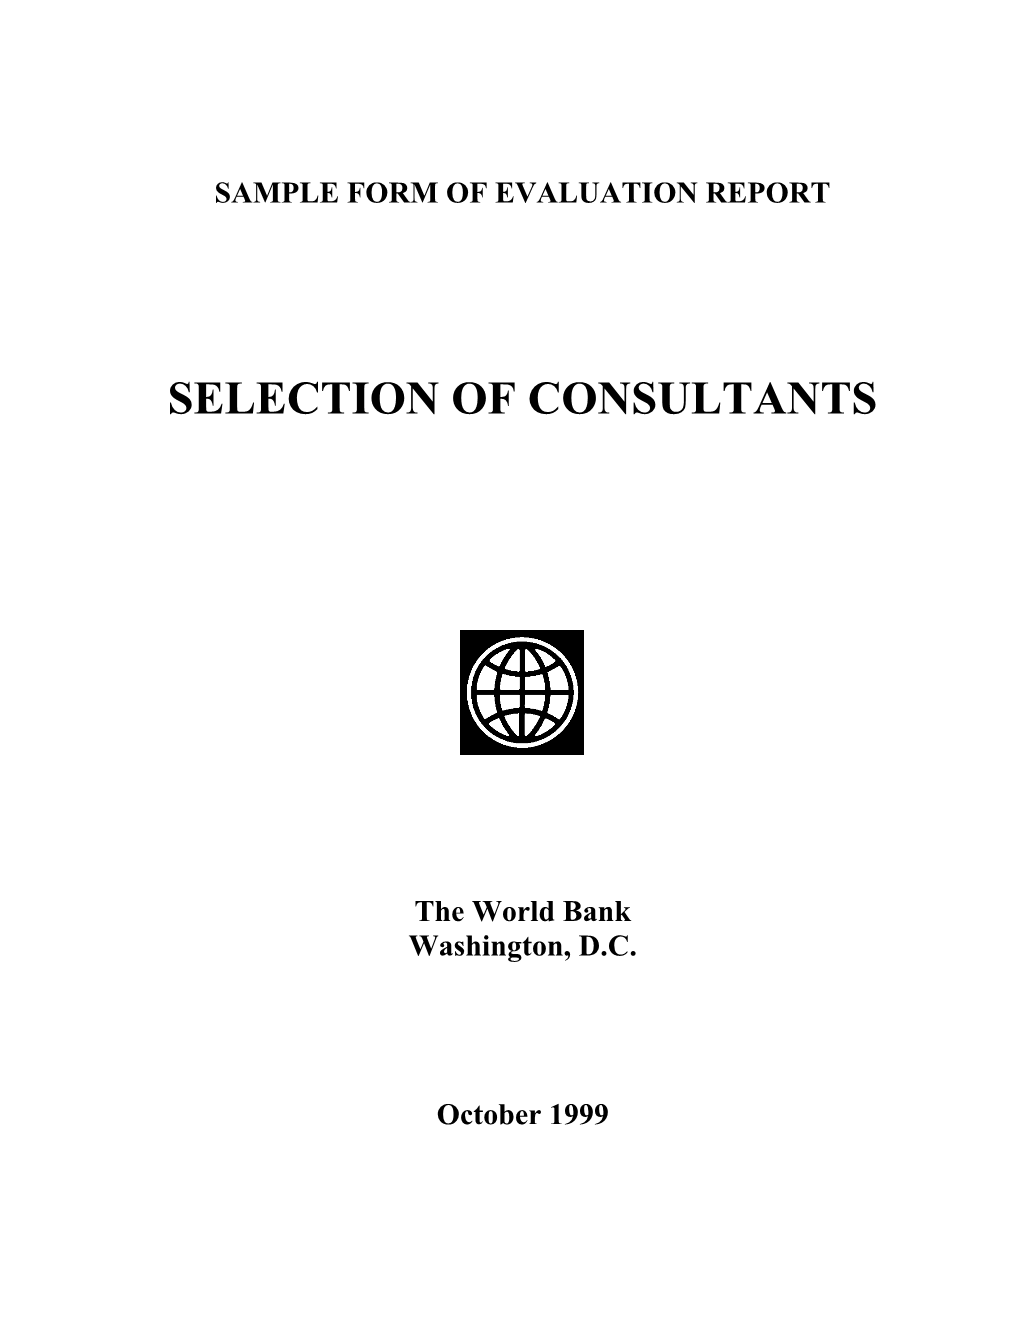 Sample Form of Evaluation Report